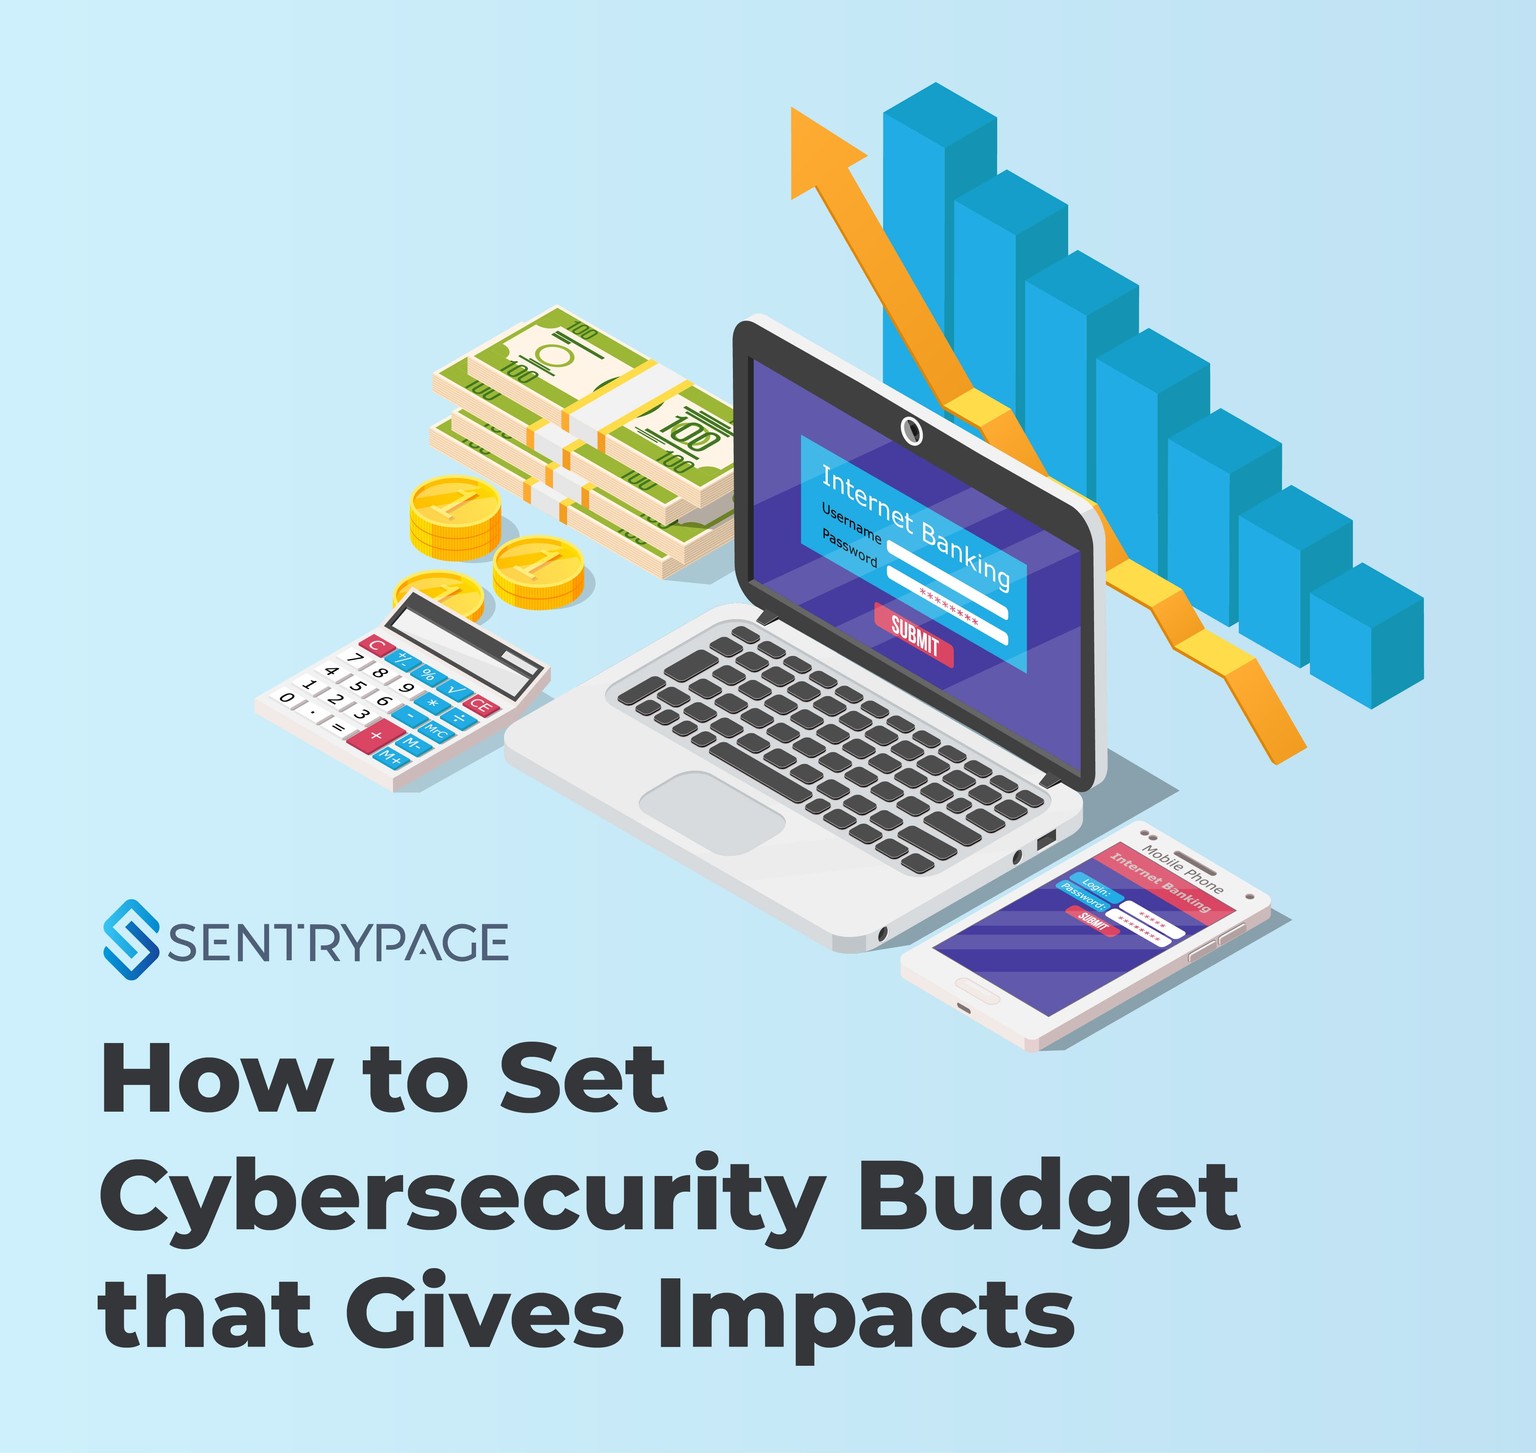 How to Set Cybersecurity Budget that Gives Impacts